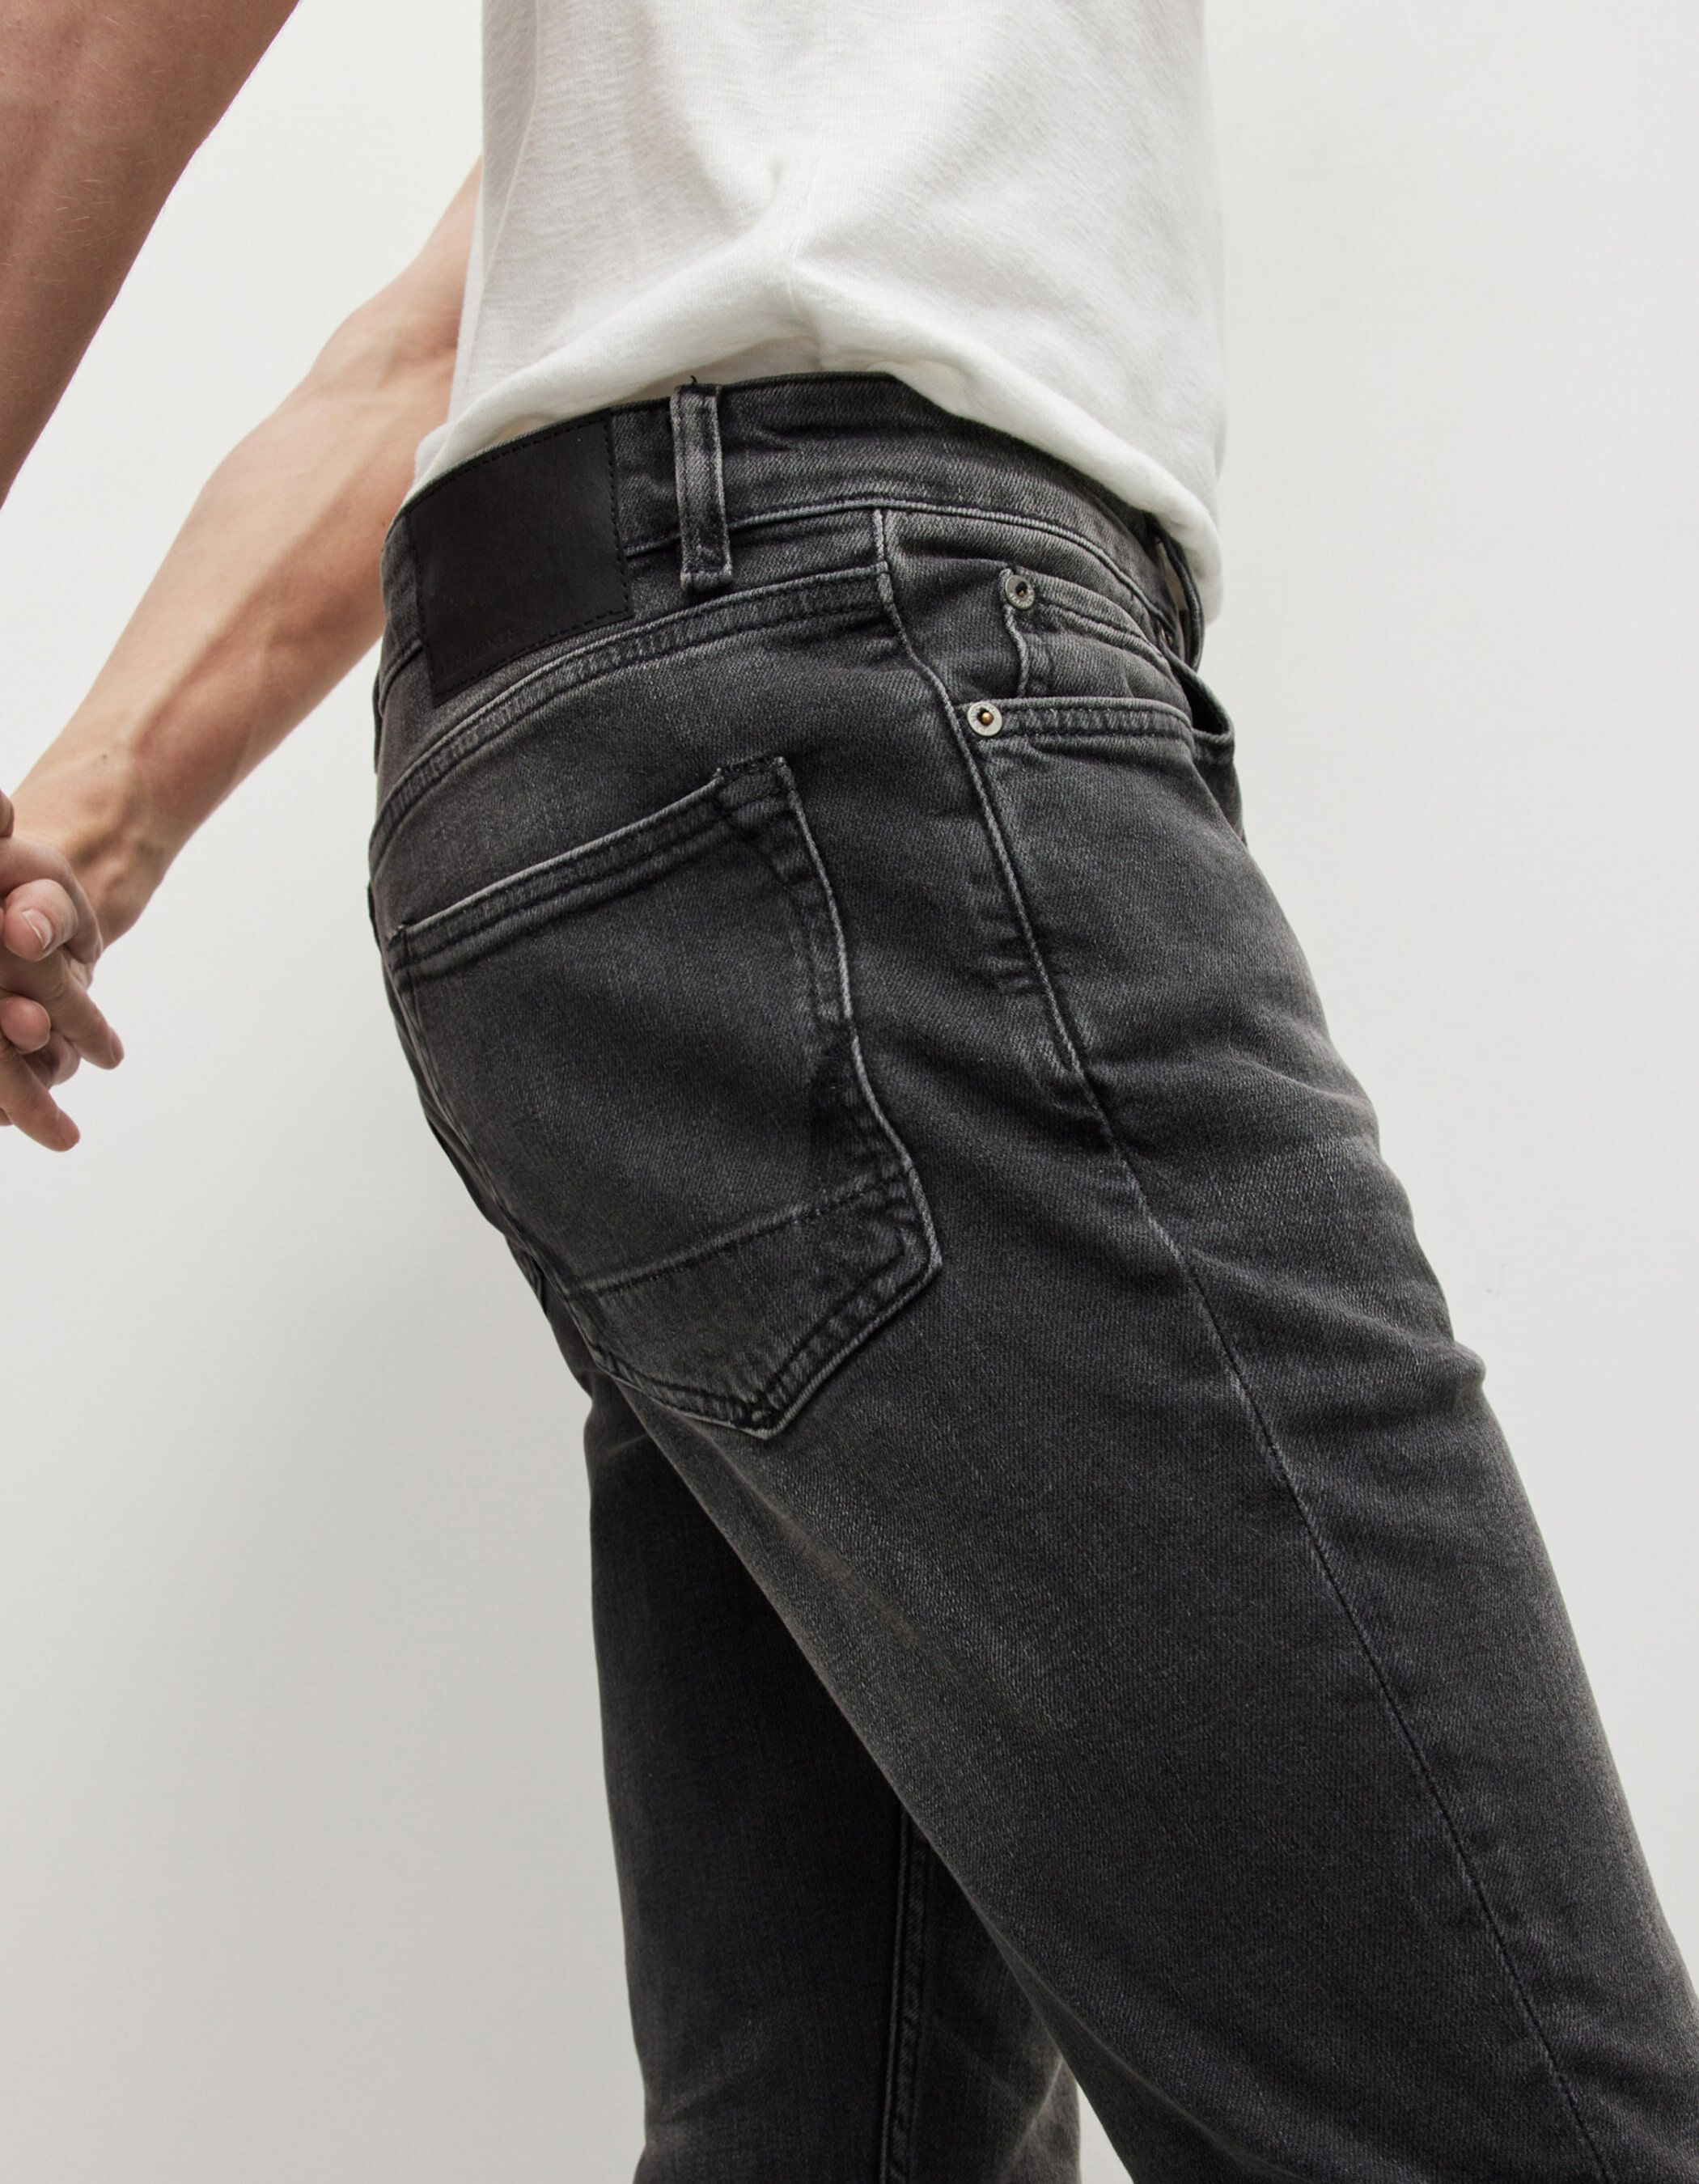 AllSaints size me denim jeans review: Does the 'one size fits three'  promise really deliver? | The Independent